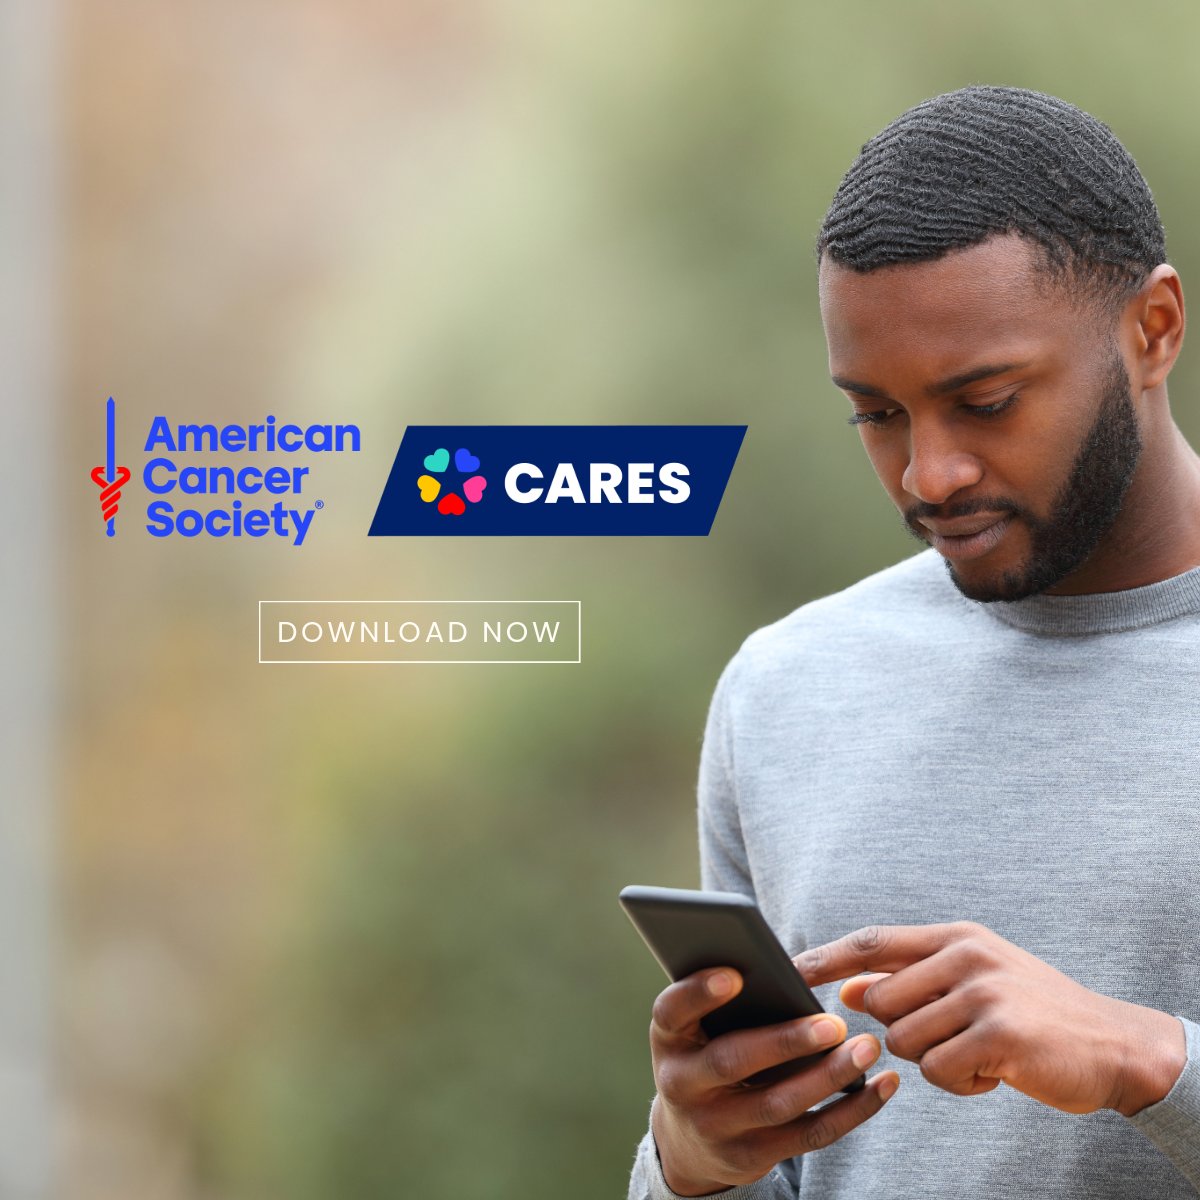 If you or someone you love has been diagnosed with cancer, deciding what’s next can be overwhelming. ACS CARES™ equips those facing cancer with curated content, programs, and services to fit their specific cancer journey. Download the App: qrfy.com/p/ACSwebsite